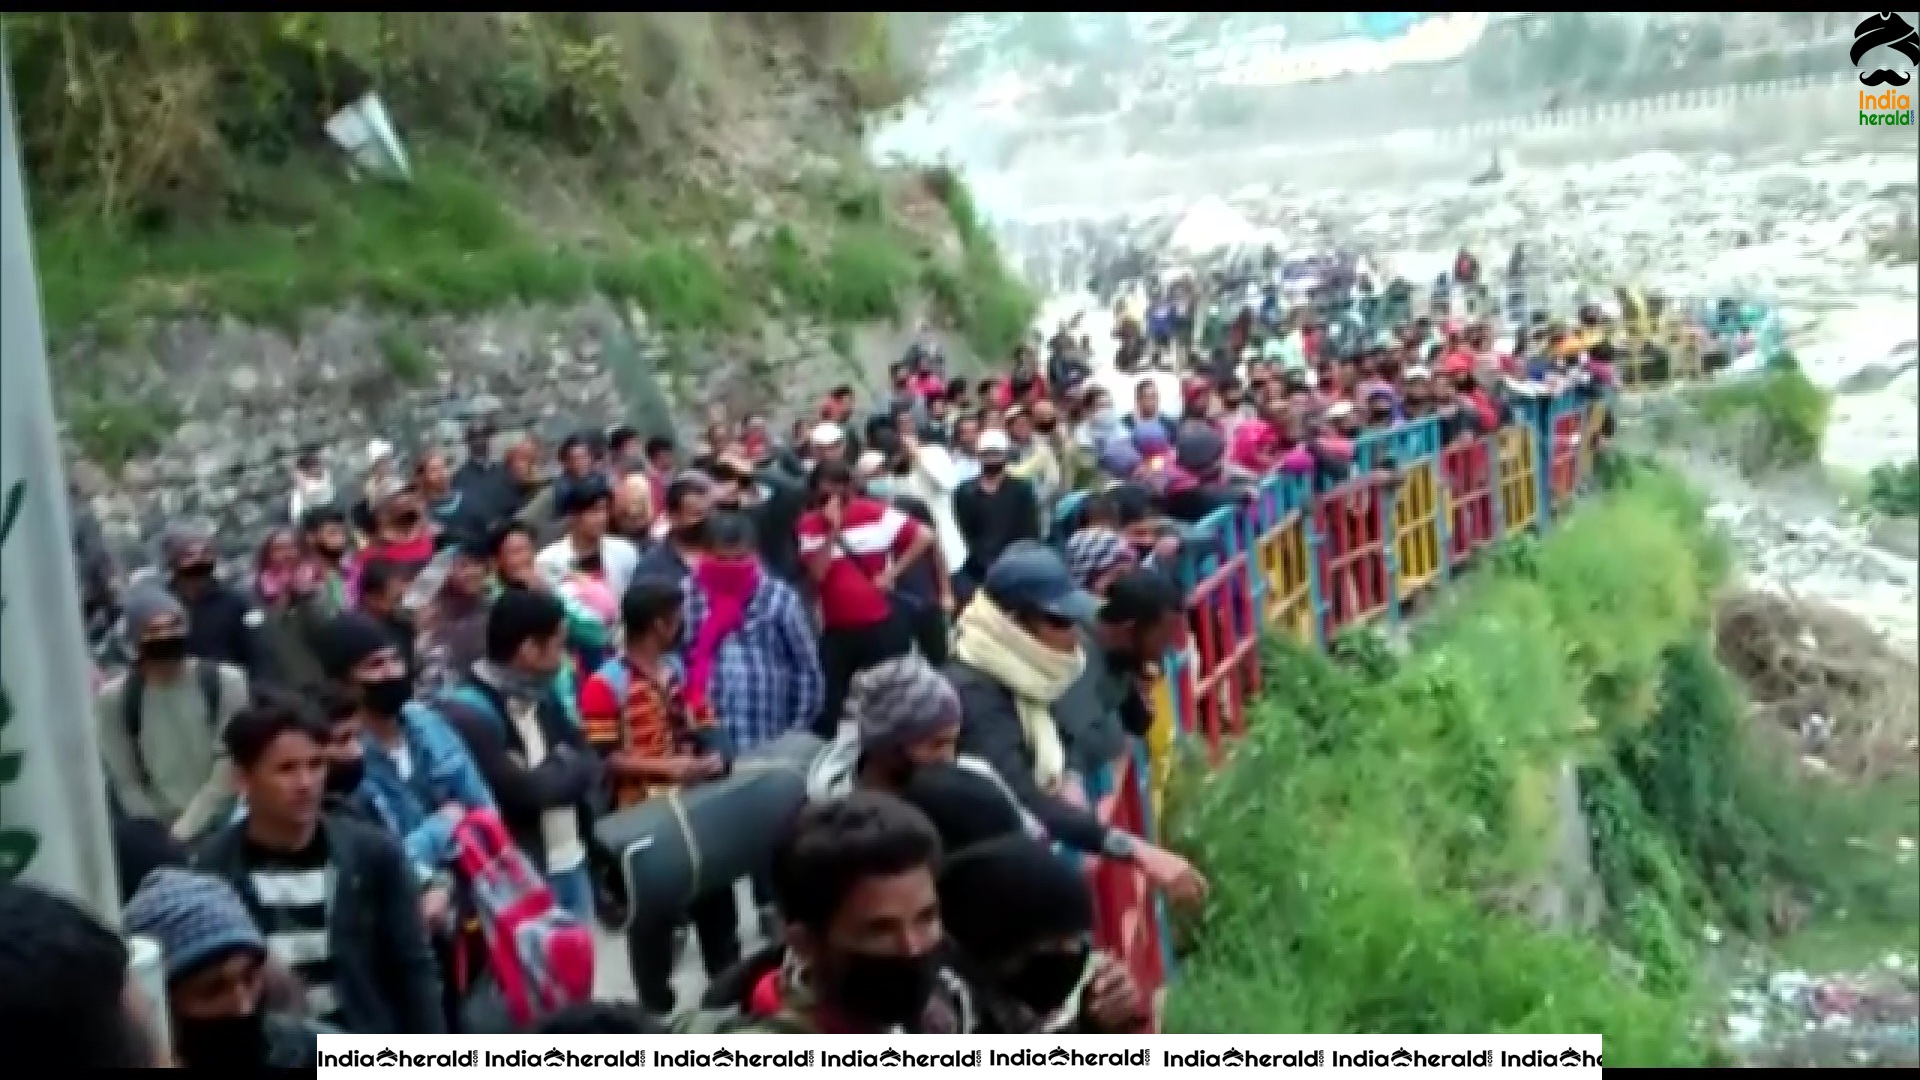 Nepalese migrant workers are stranded at border due to Corona Virus threat